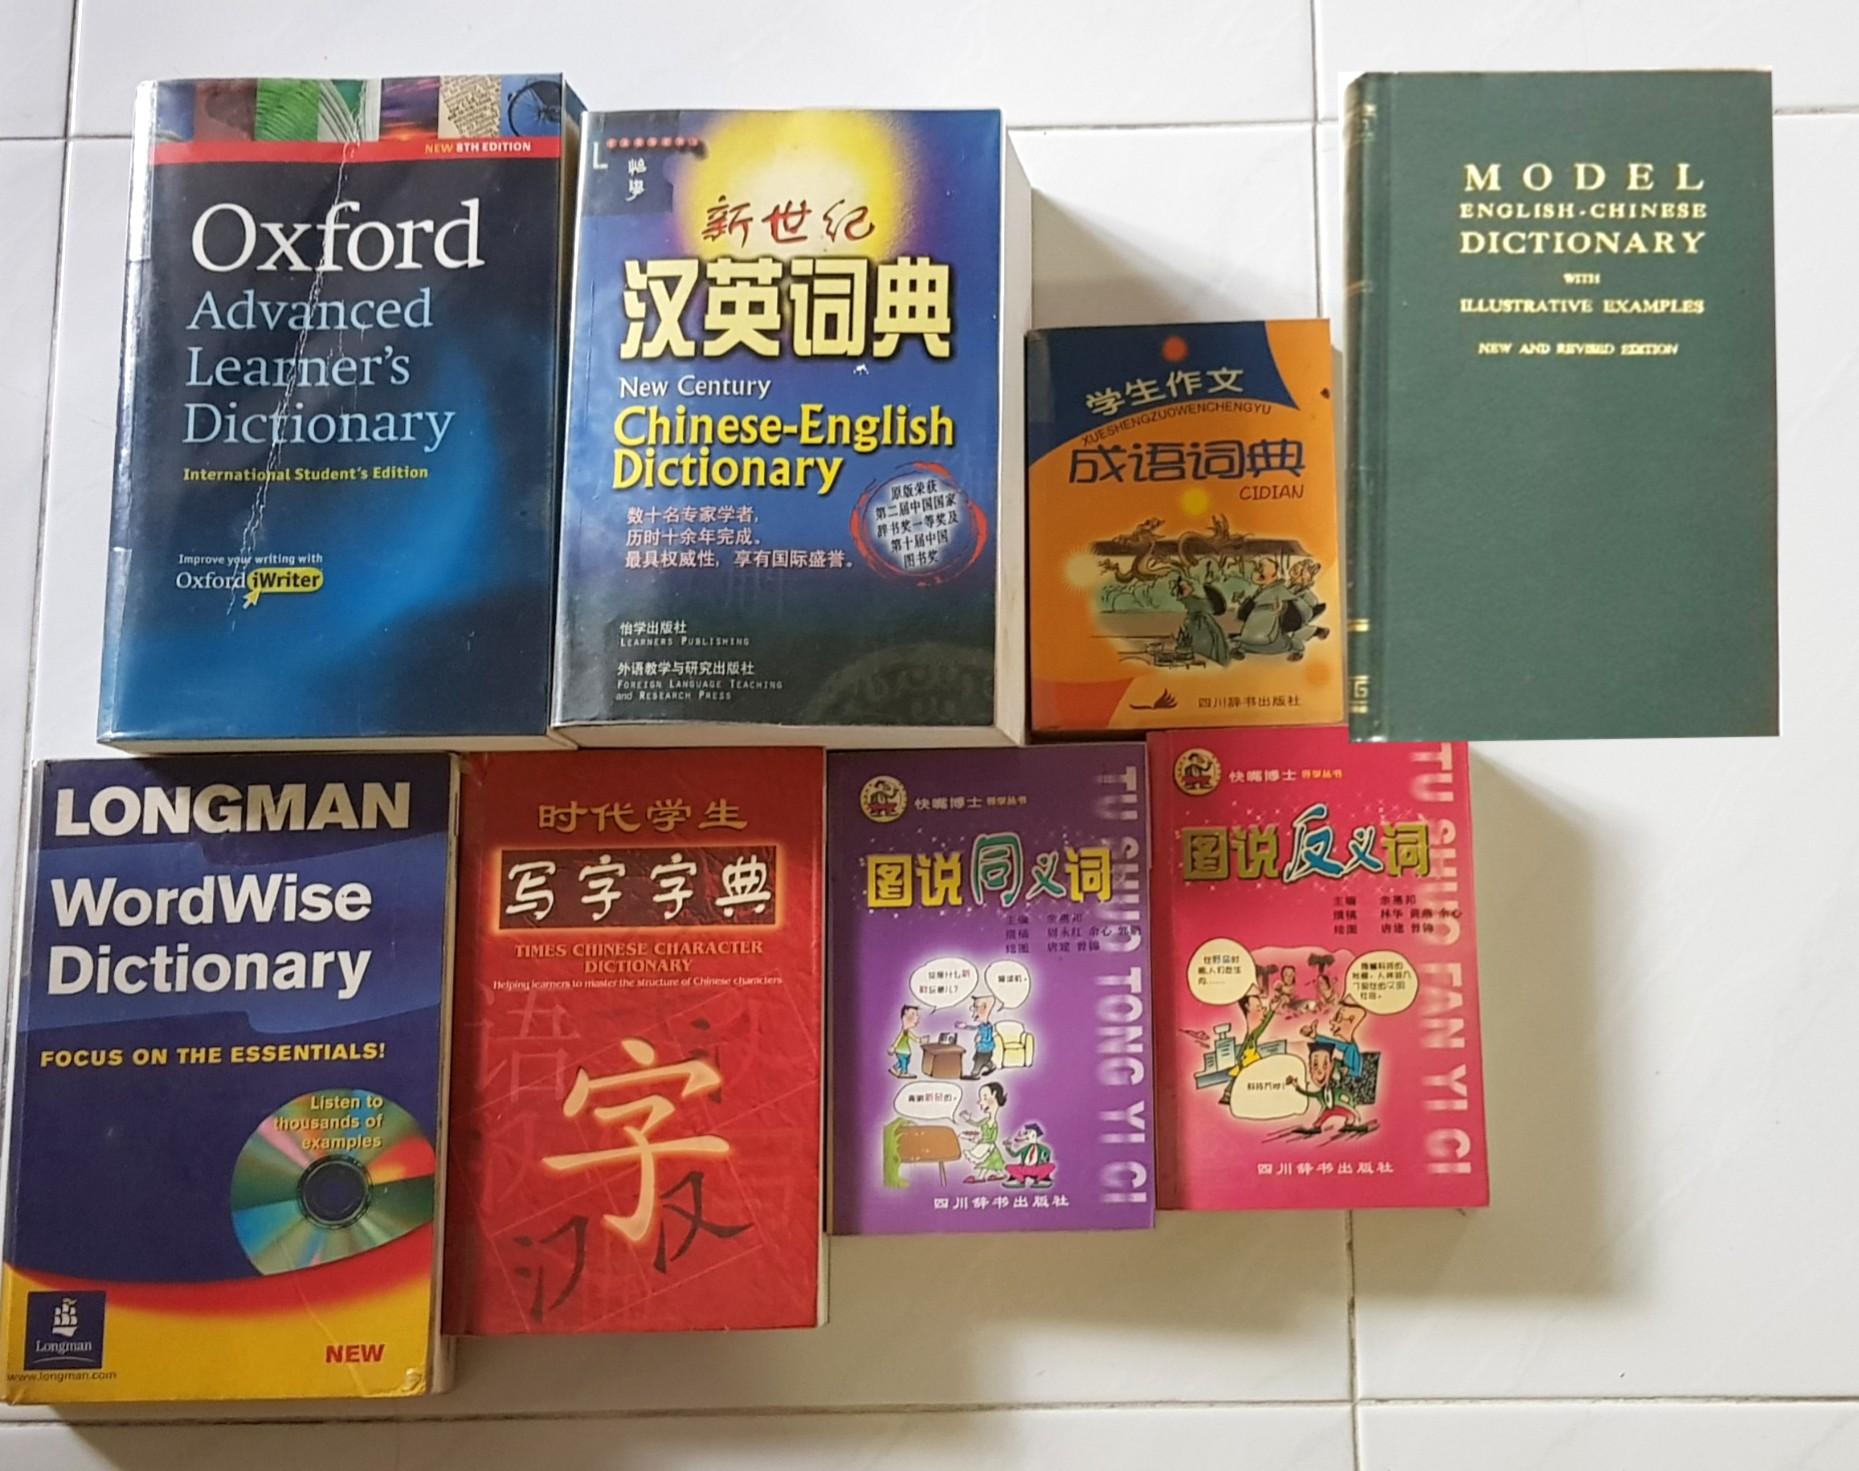 Fiction　Chinese,　Magazines,　Hobbies　Synonyms,　Carousell　Toys,　Idiom,　Antonyms,　Books　English　on　Dictionary,　Non-Fiction